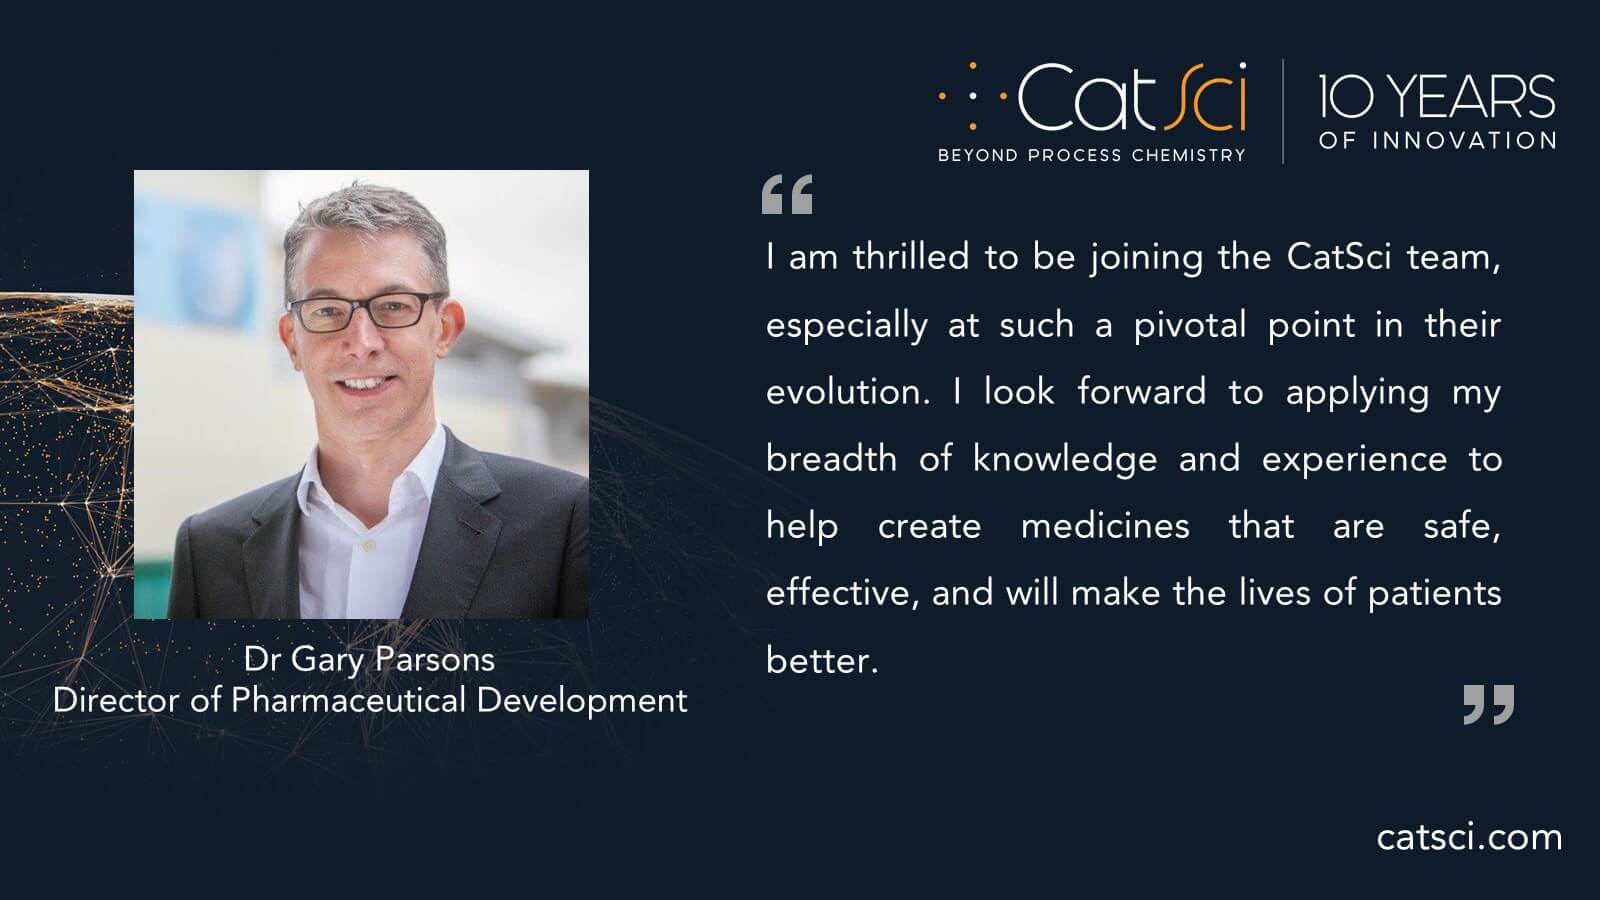 CatSci Appoints New Director of Pharmaceutical Development, Dr Gary Parsons